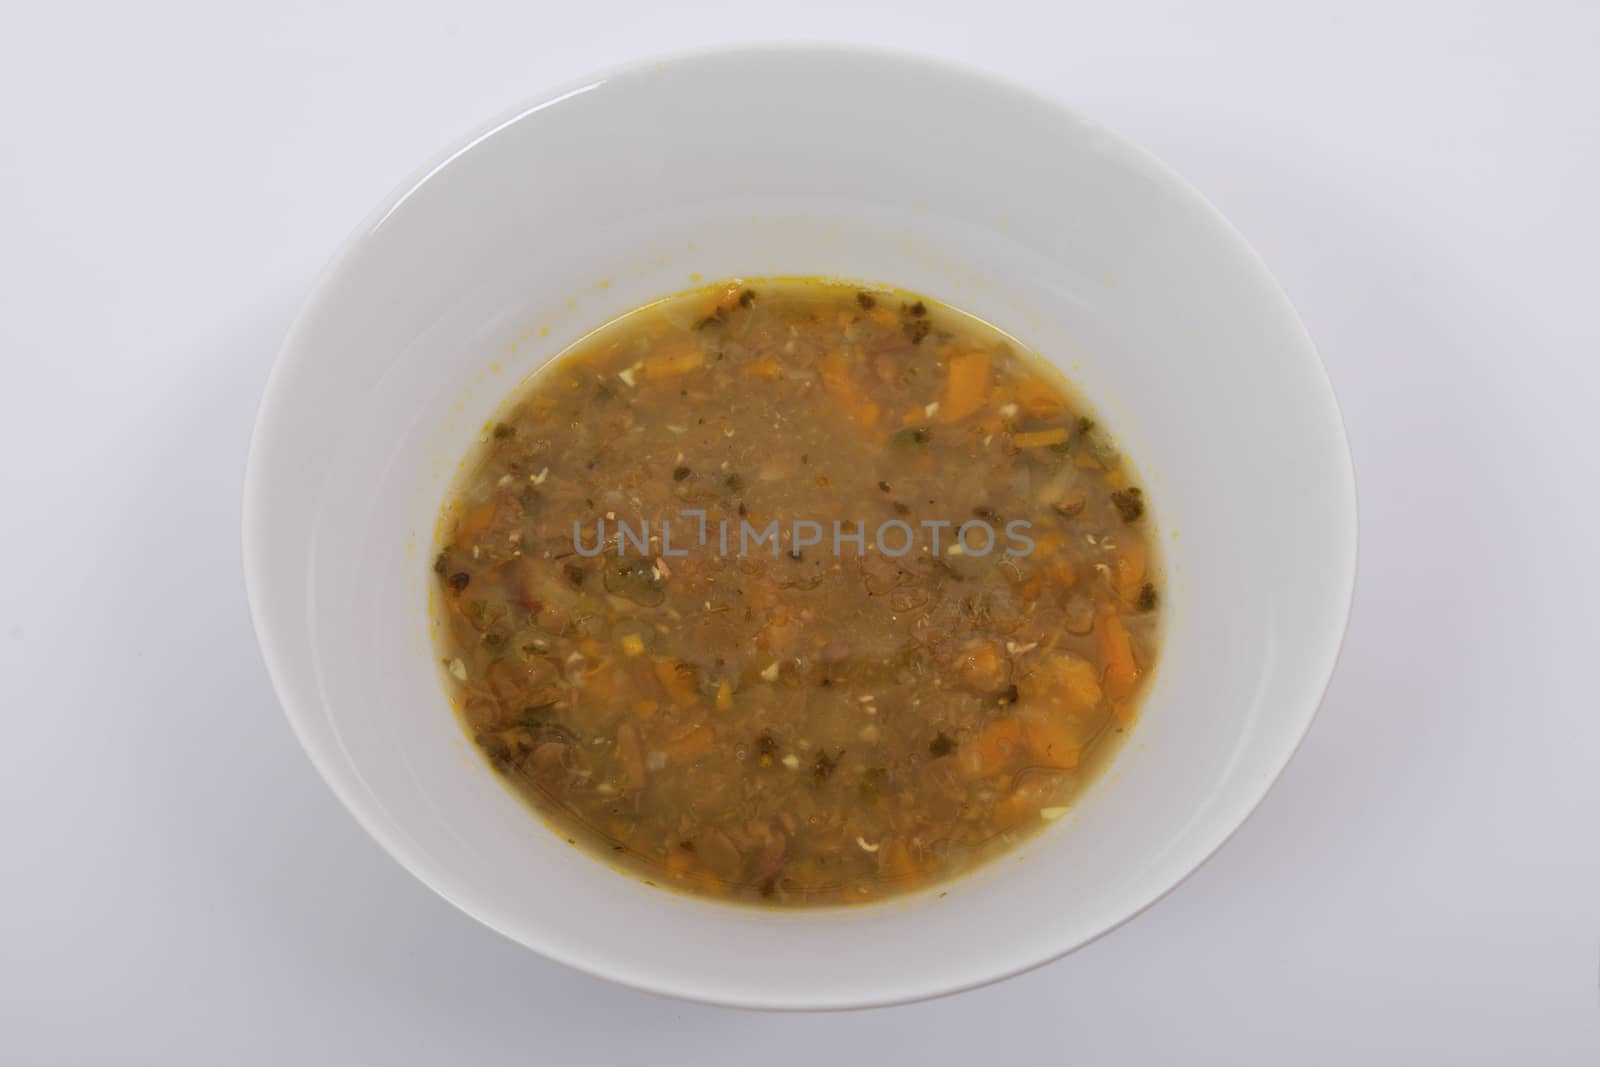 Lentil soup with carrot on a white background